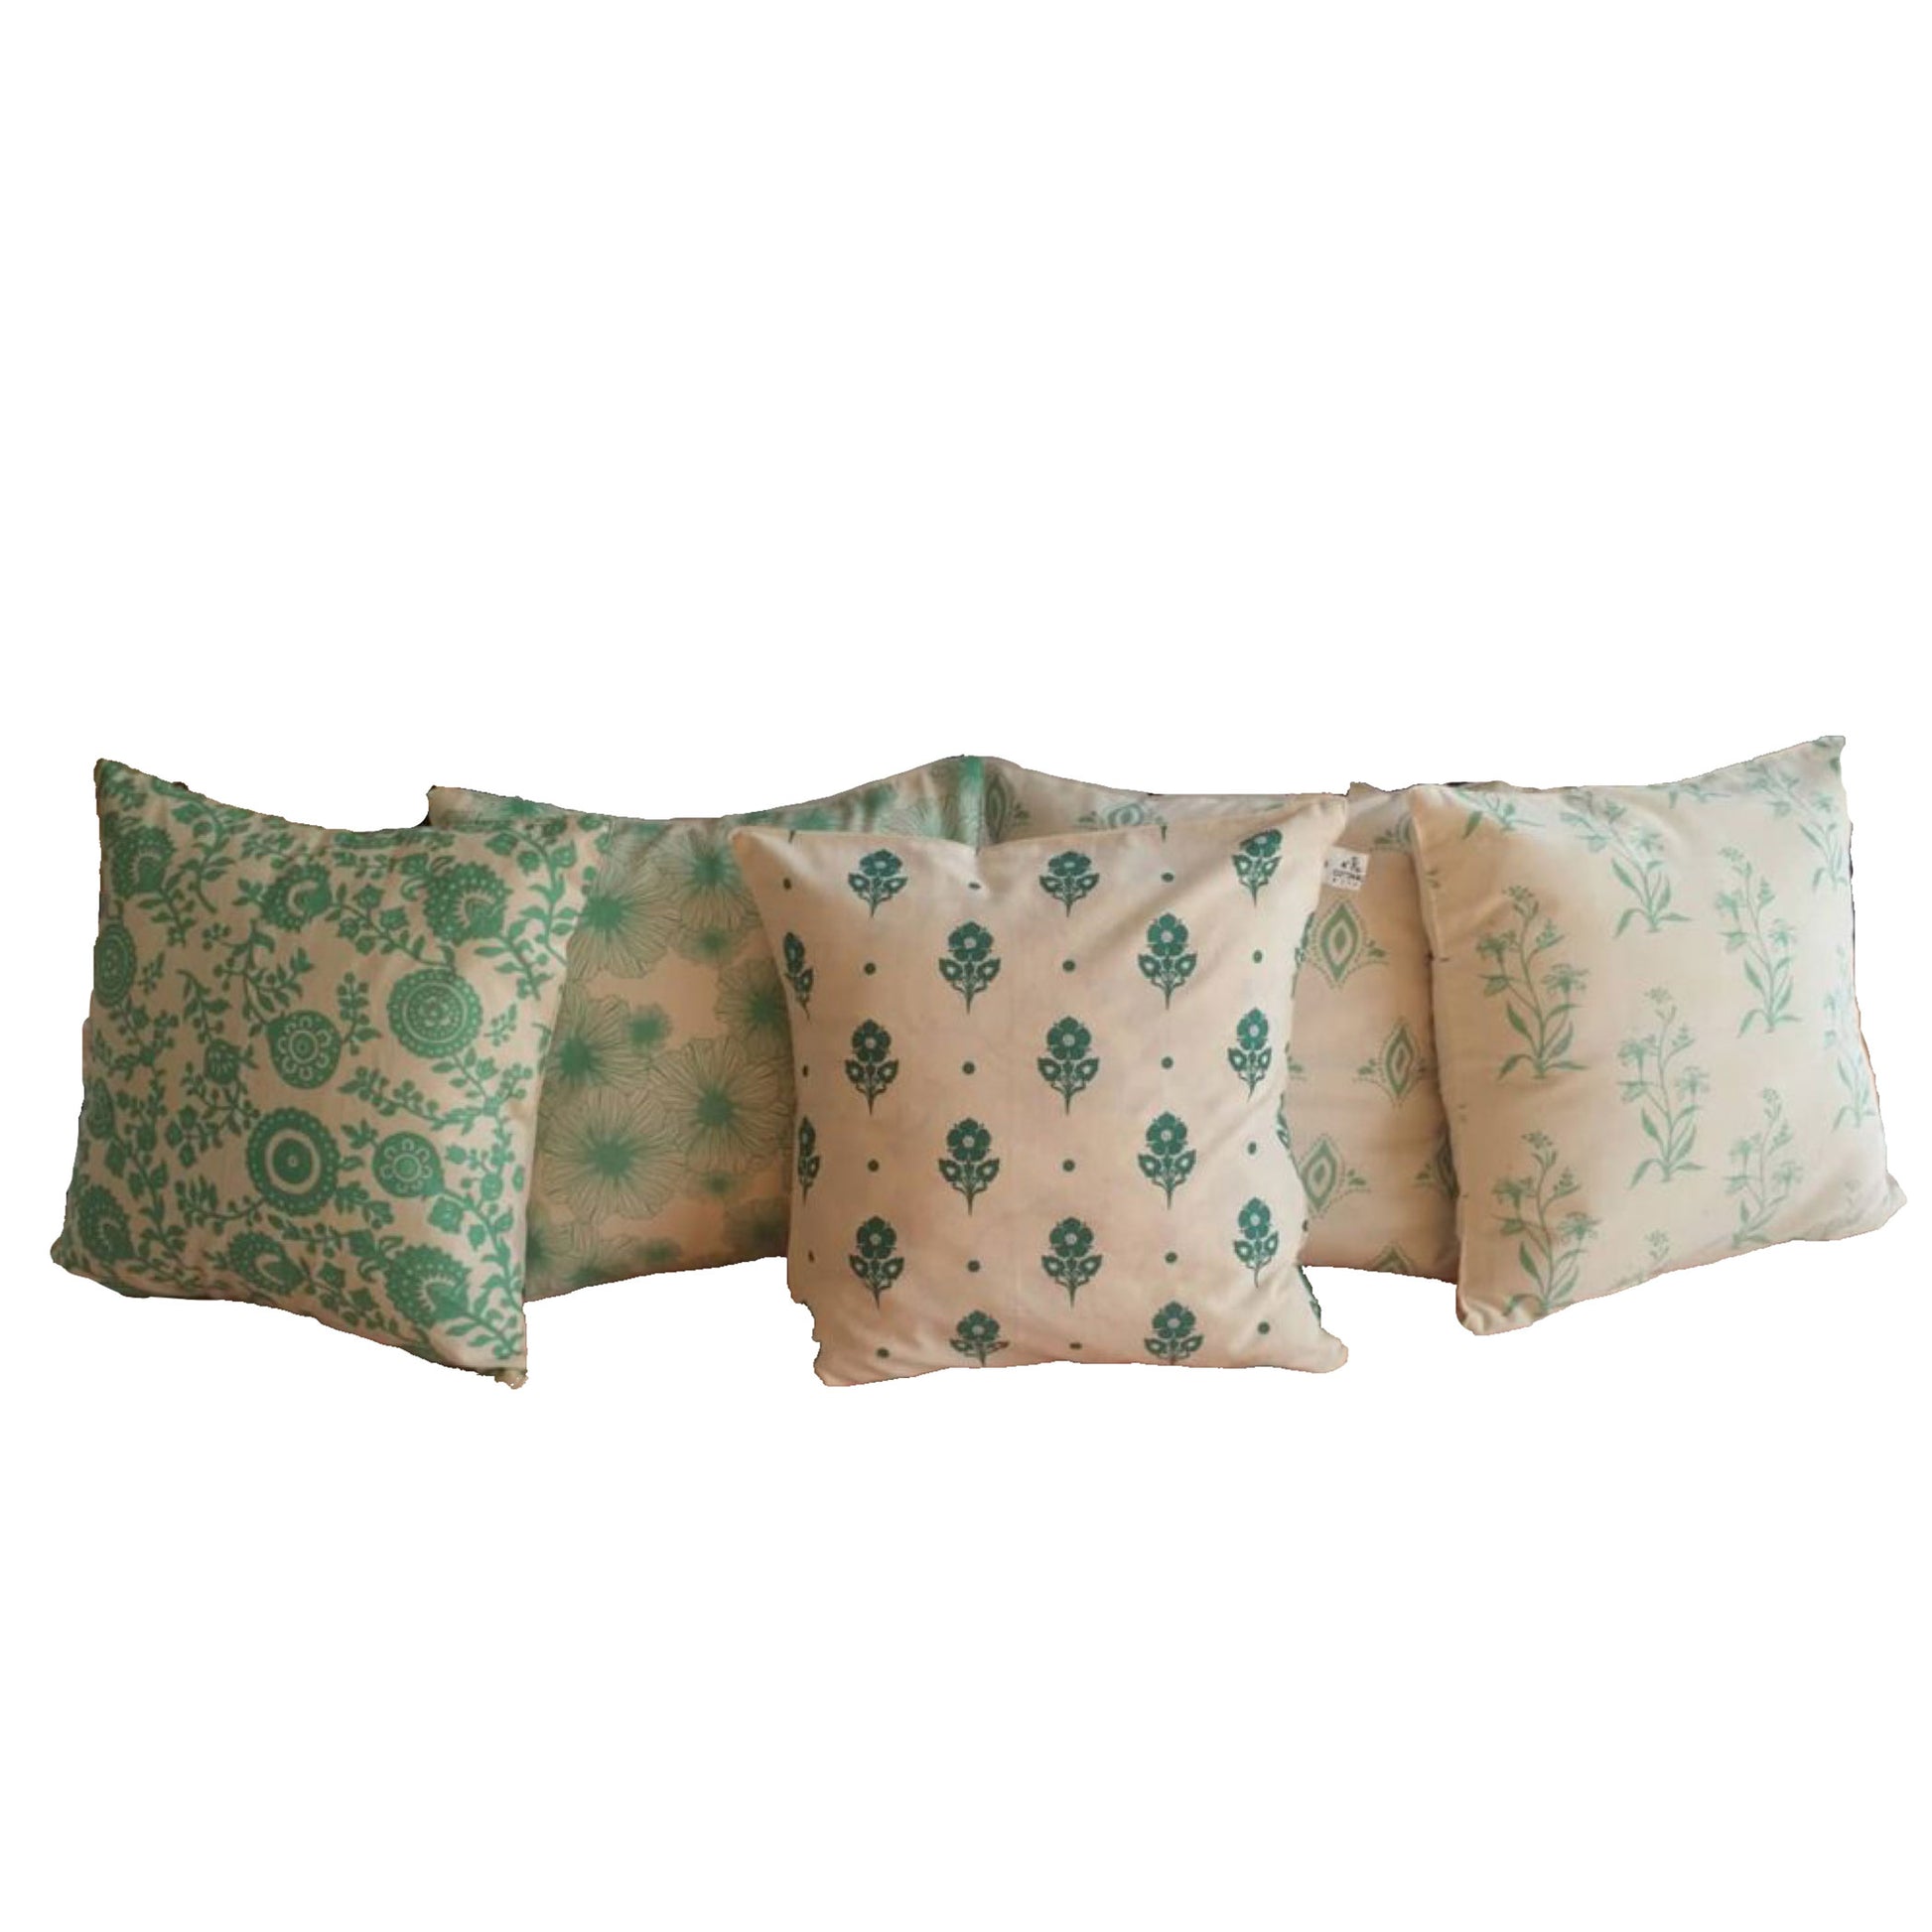 Stella Decor cushion cover collection with design garden dreams five pieces in size 50x50 cm in color turquoise